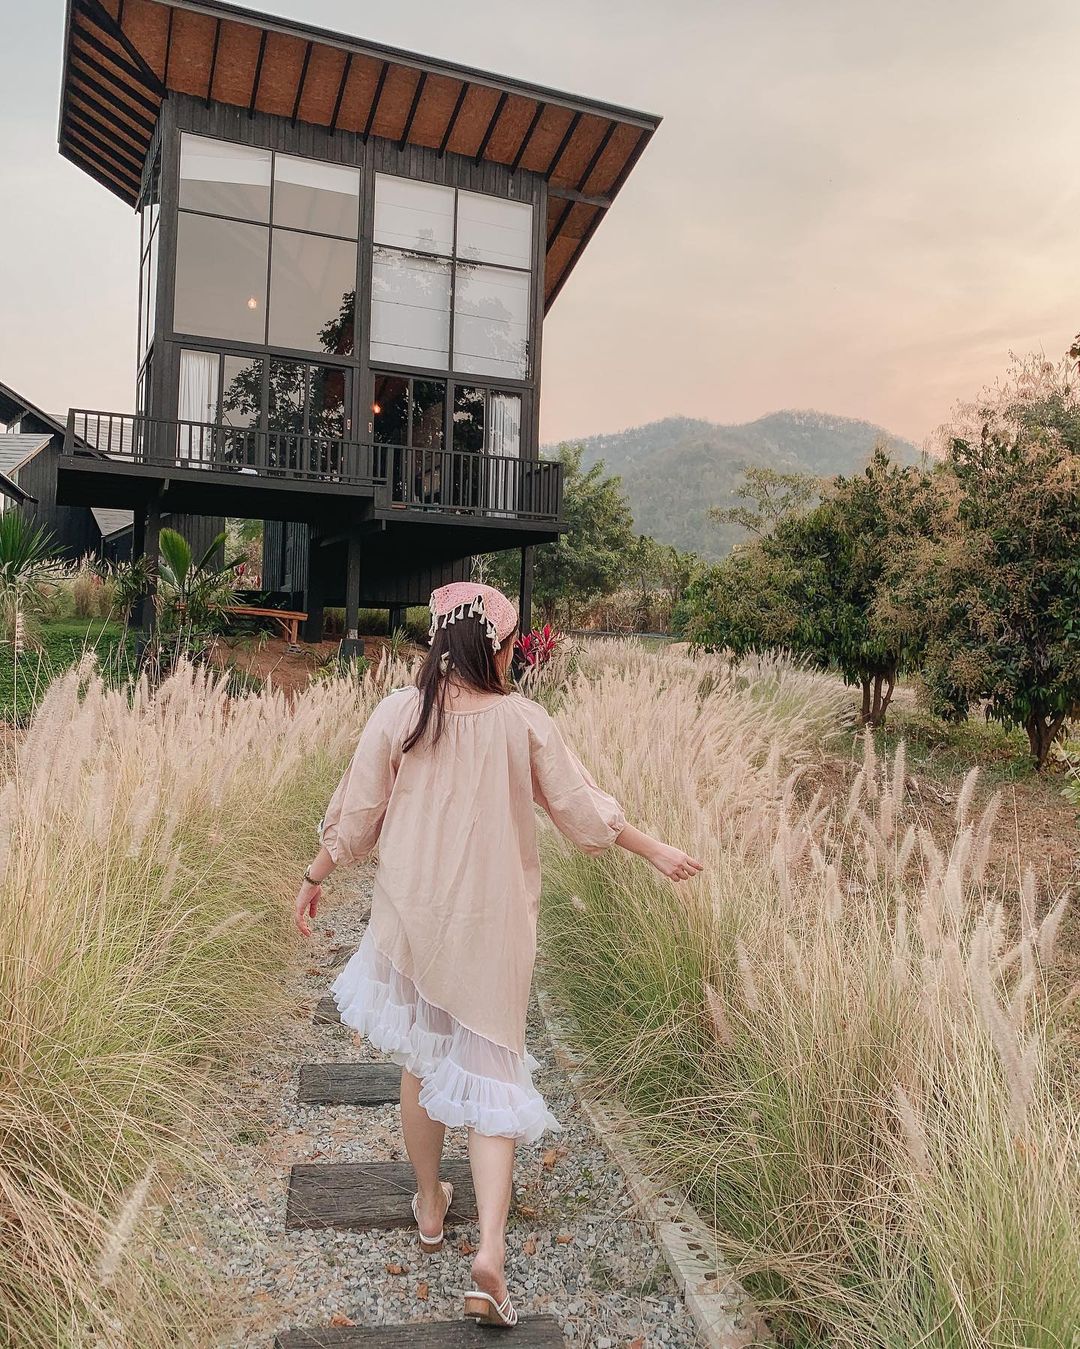 BaanNubdao Homestay's Cottages Has Floor To Ceiling Windows & Muji Hotel-esque Furniture